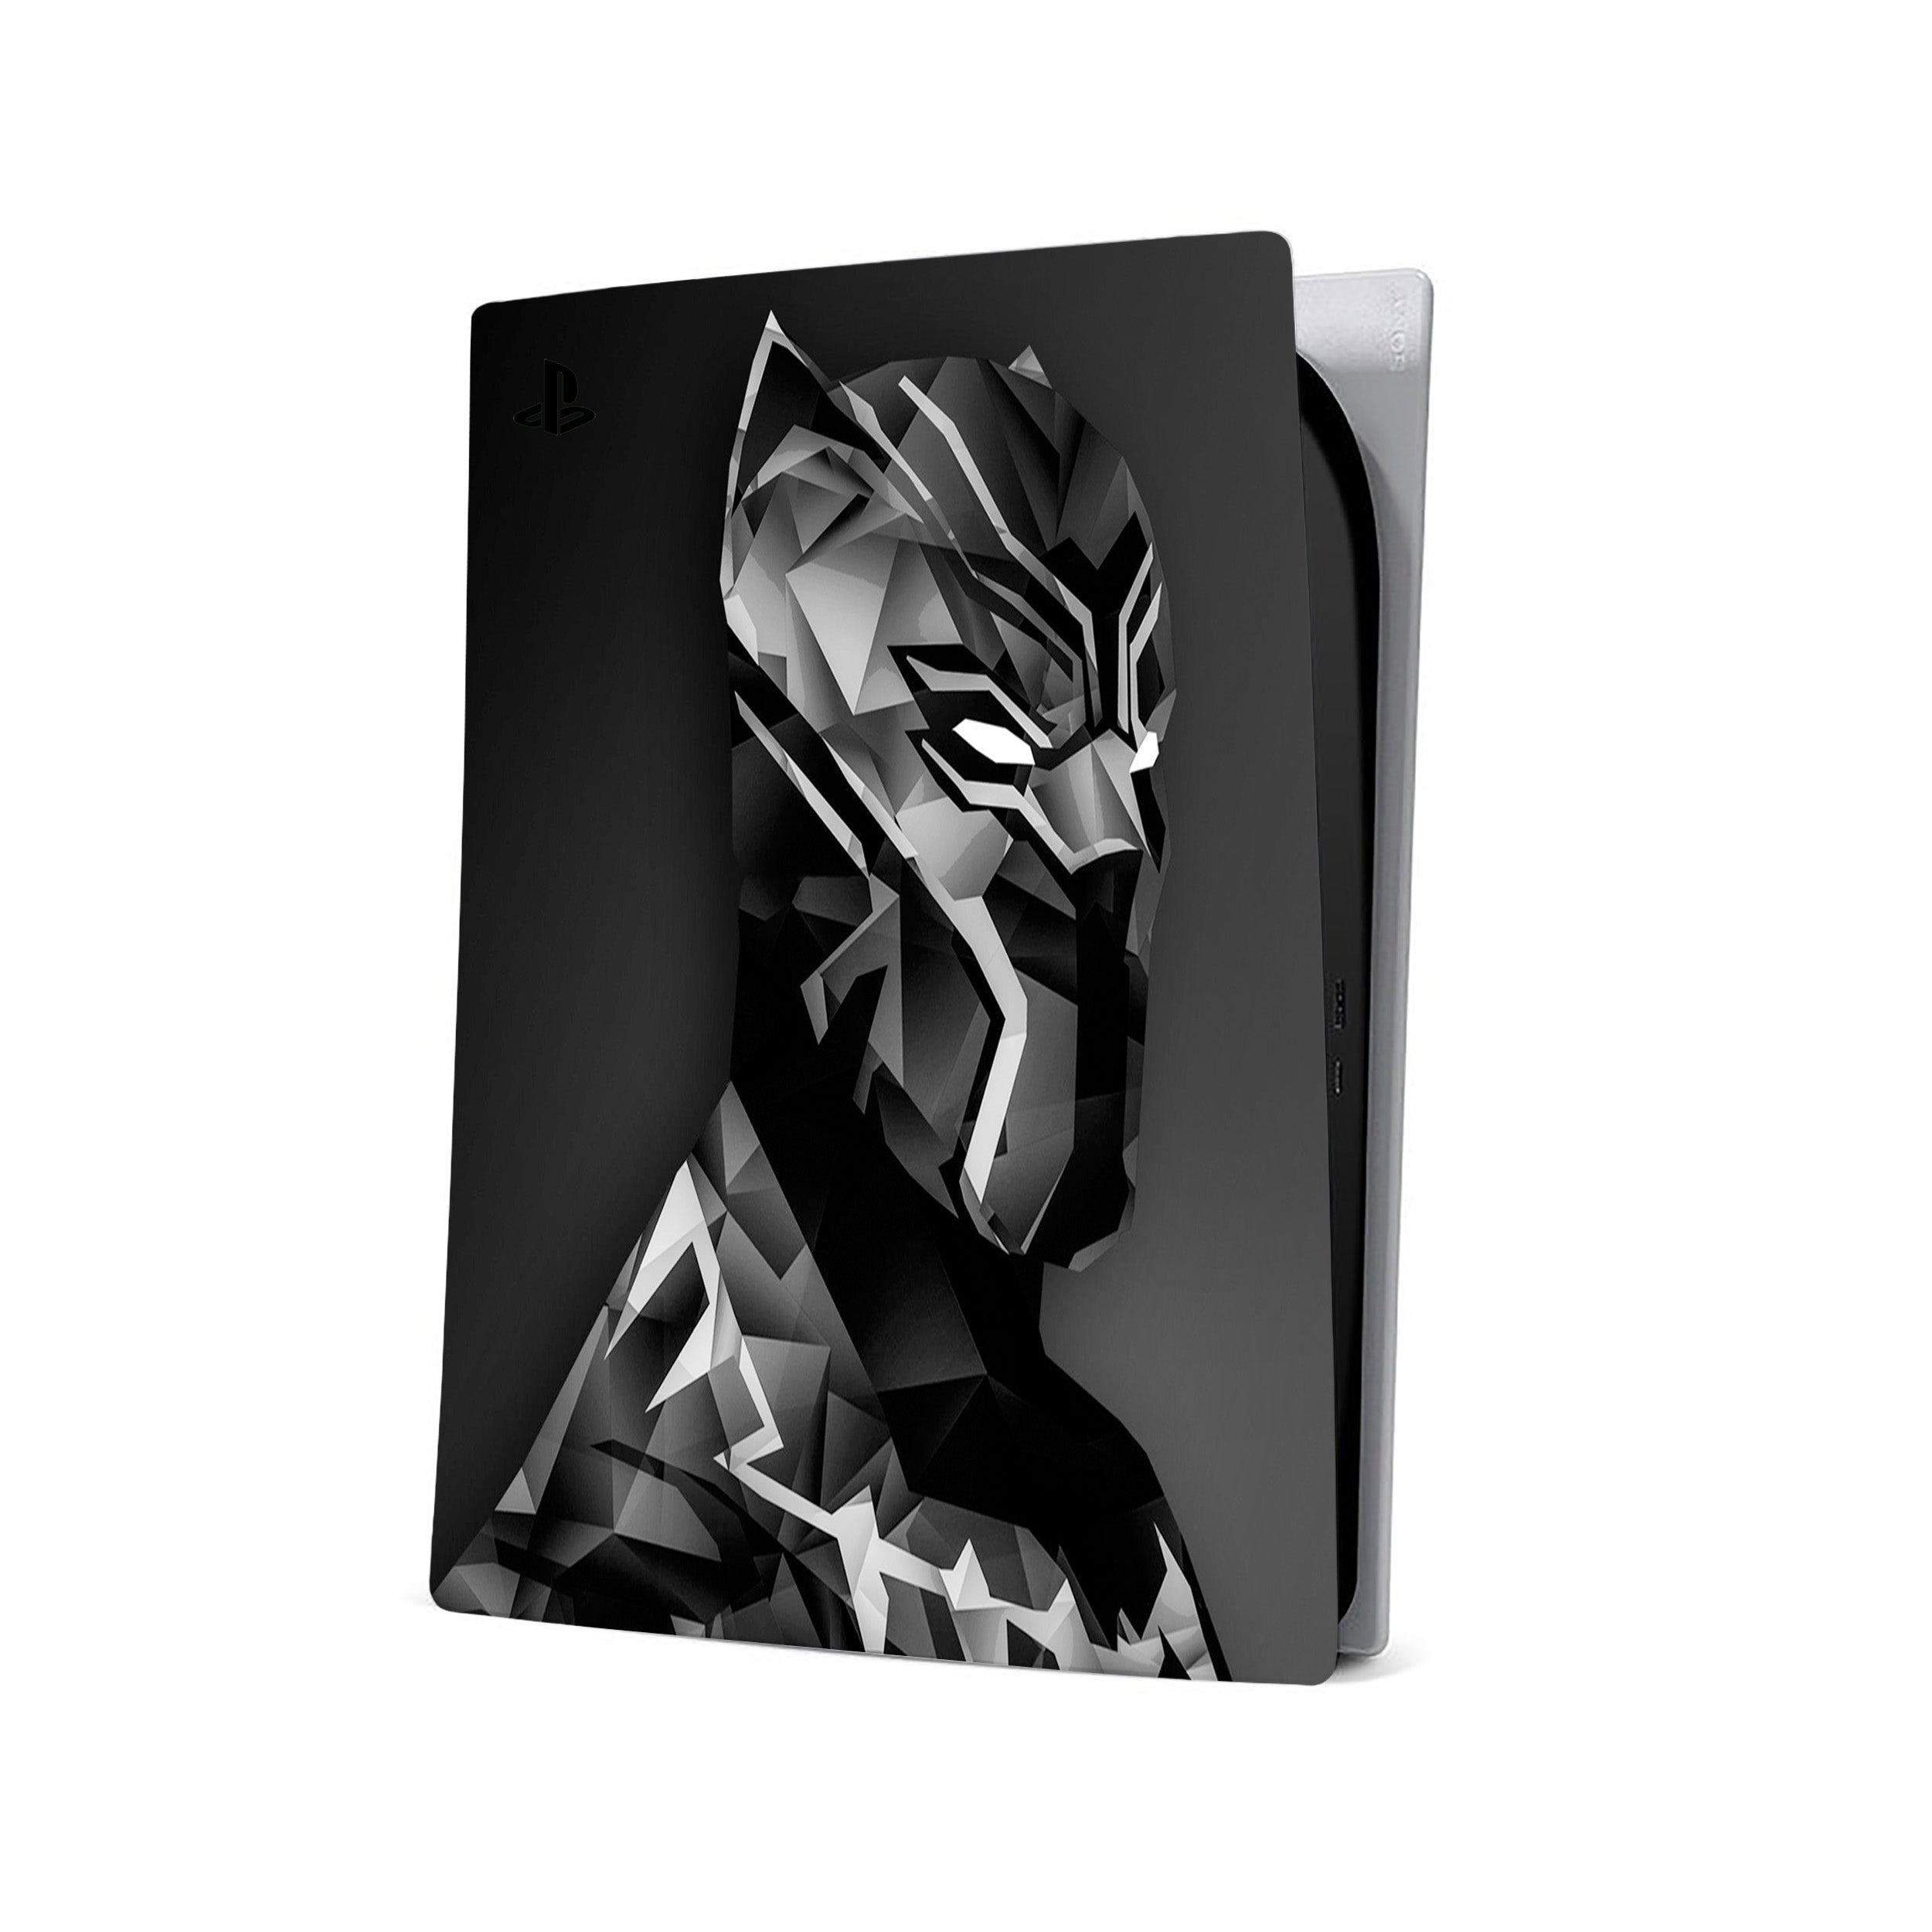 A video game skin featuring a Marvel Comics Black Panther design for the PS5.